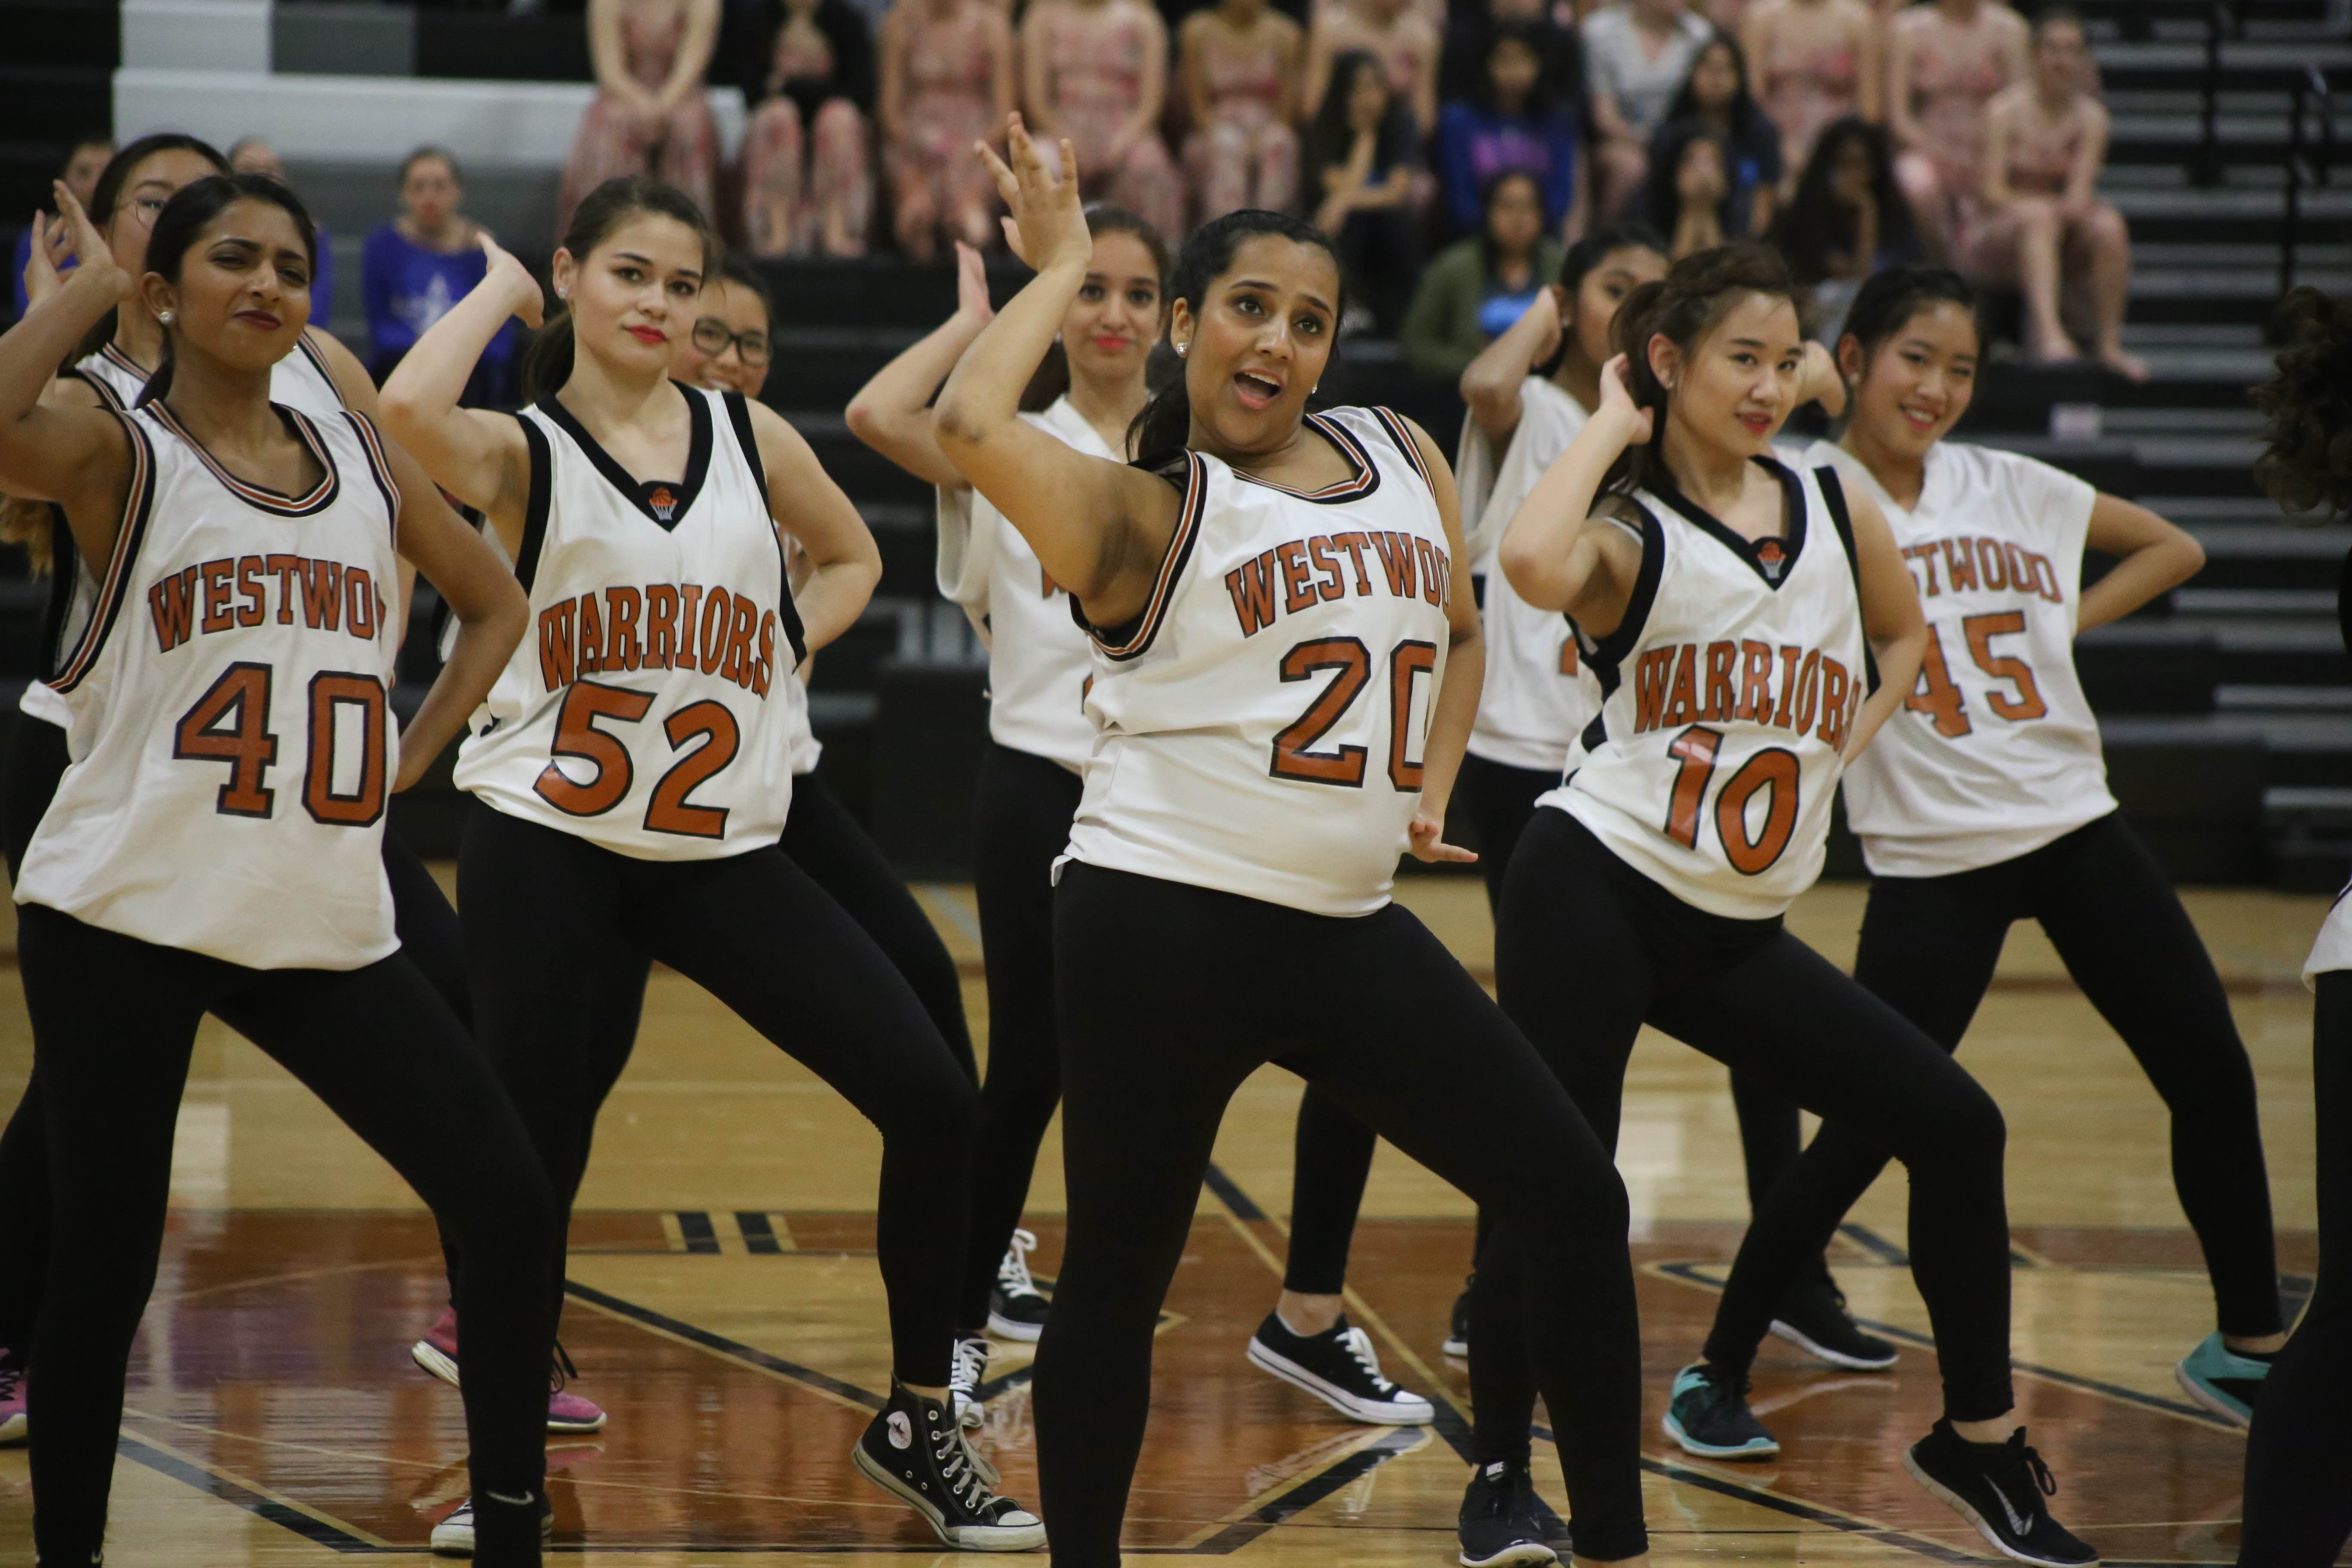 Dancers+Compete+at+Annual+Westwood+Dance+Classic